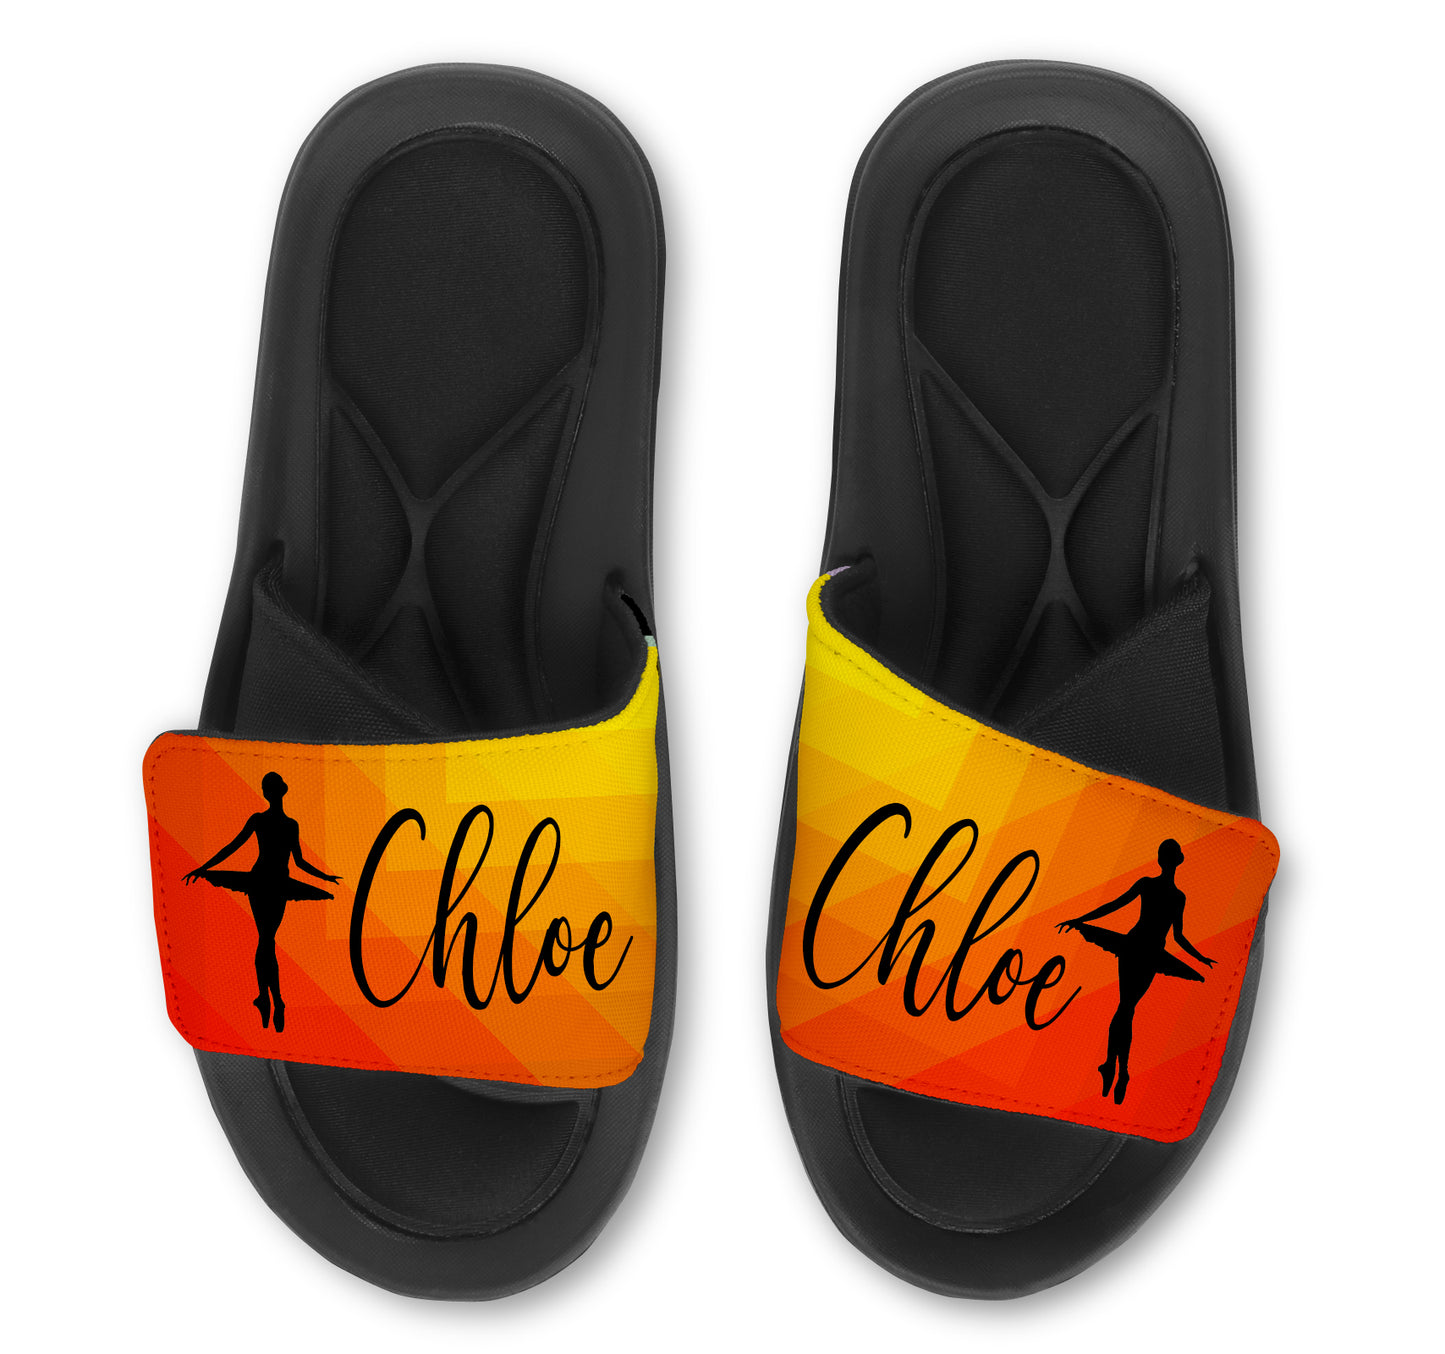 BALLERINA Abstract Custom Slides / Sandals - Choose your Background!